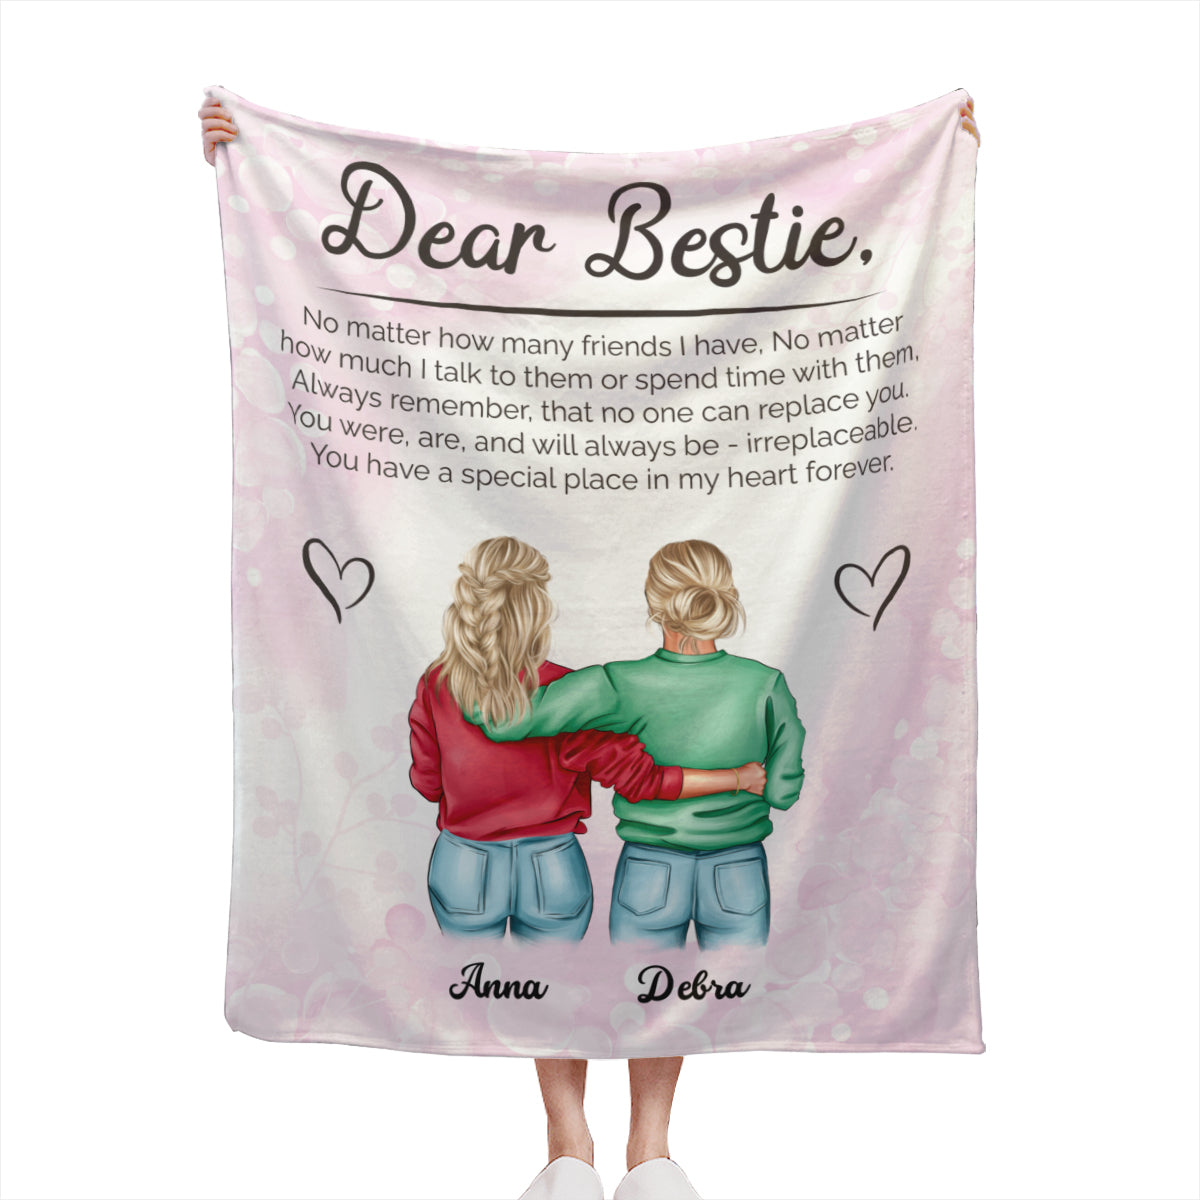 You Have a Special Place in My Heart Forever-Photo Blanket for Bestie